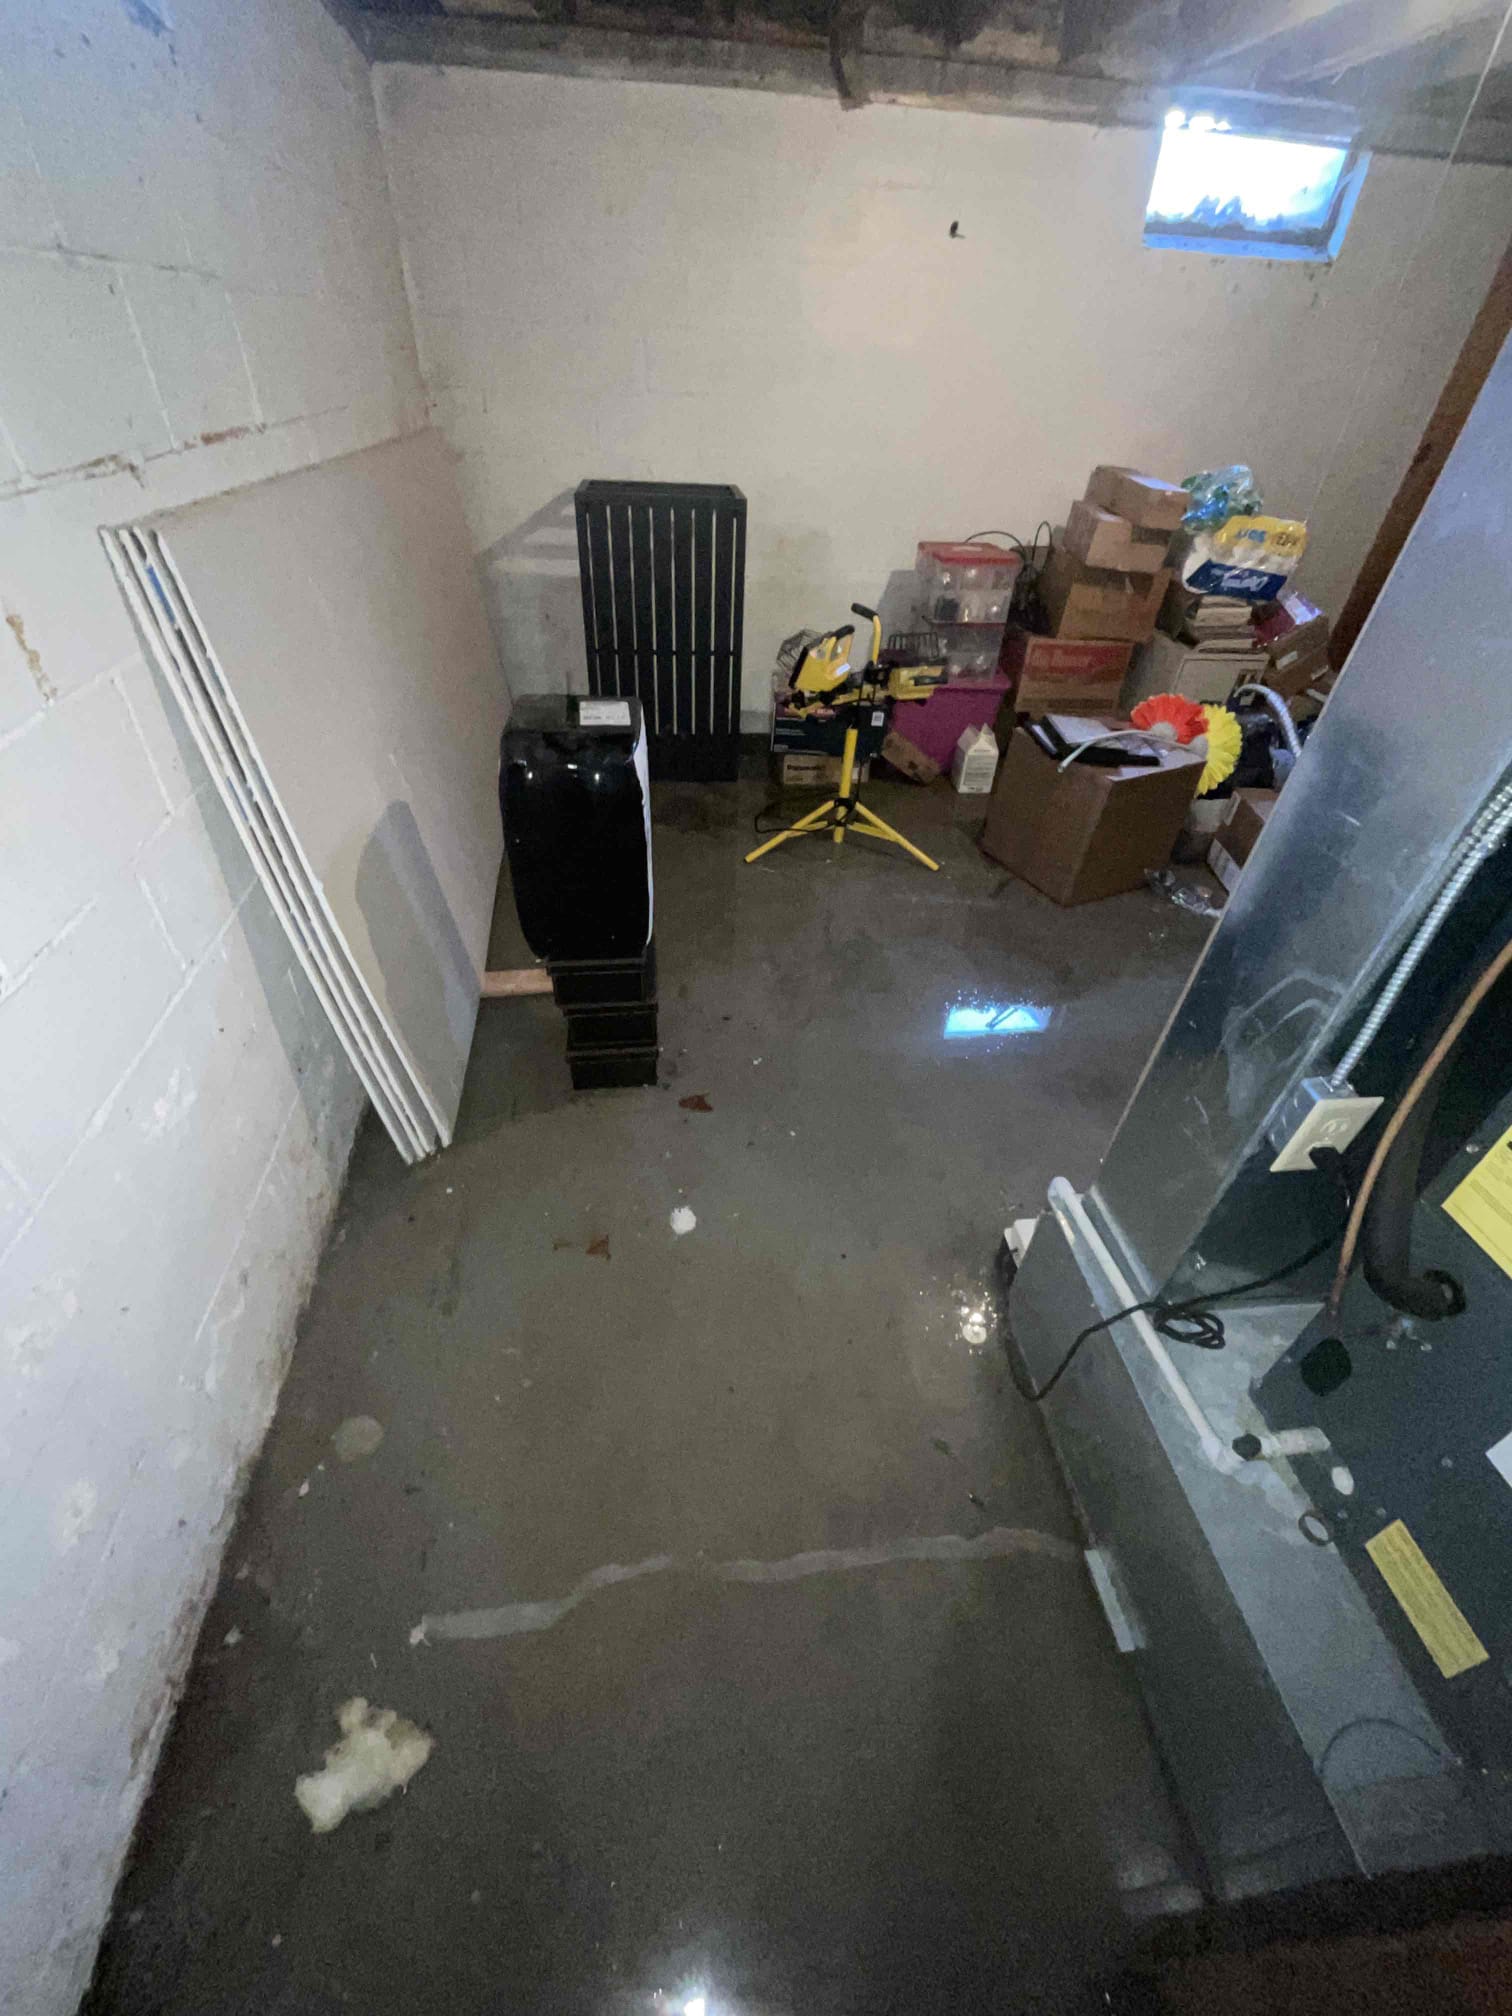 wet basement due to pipe burst